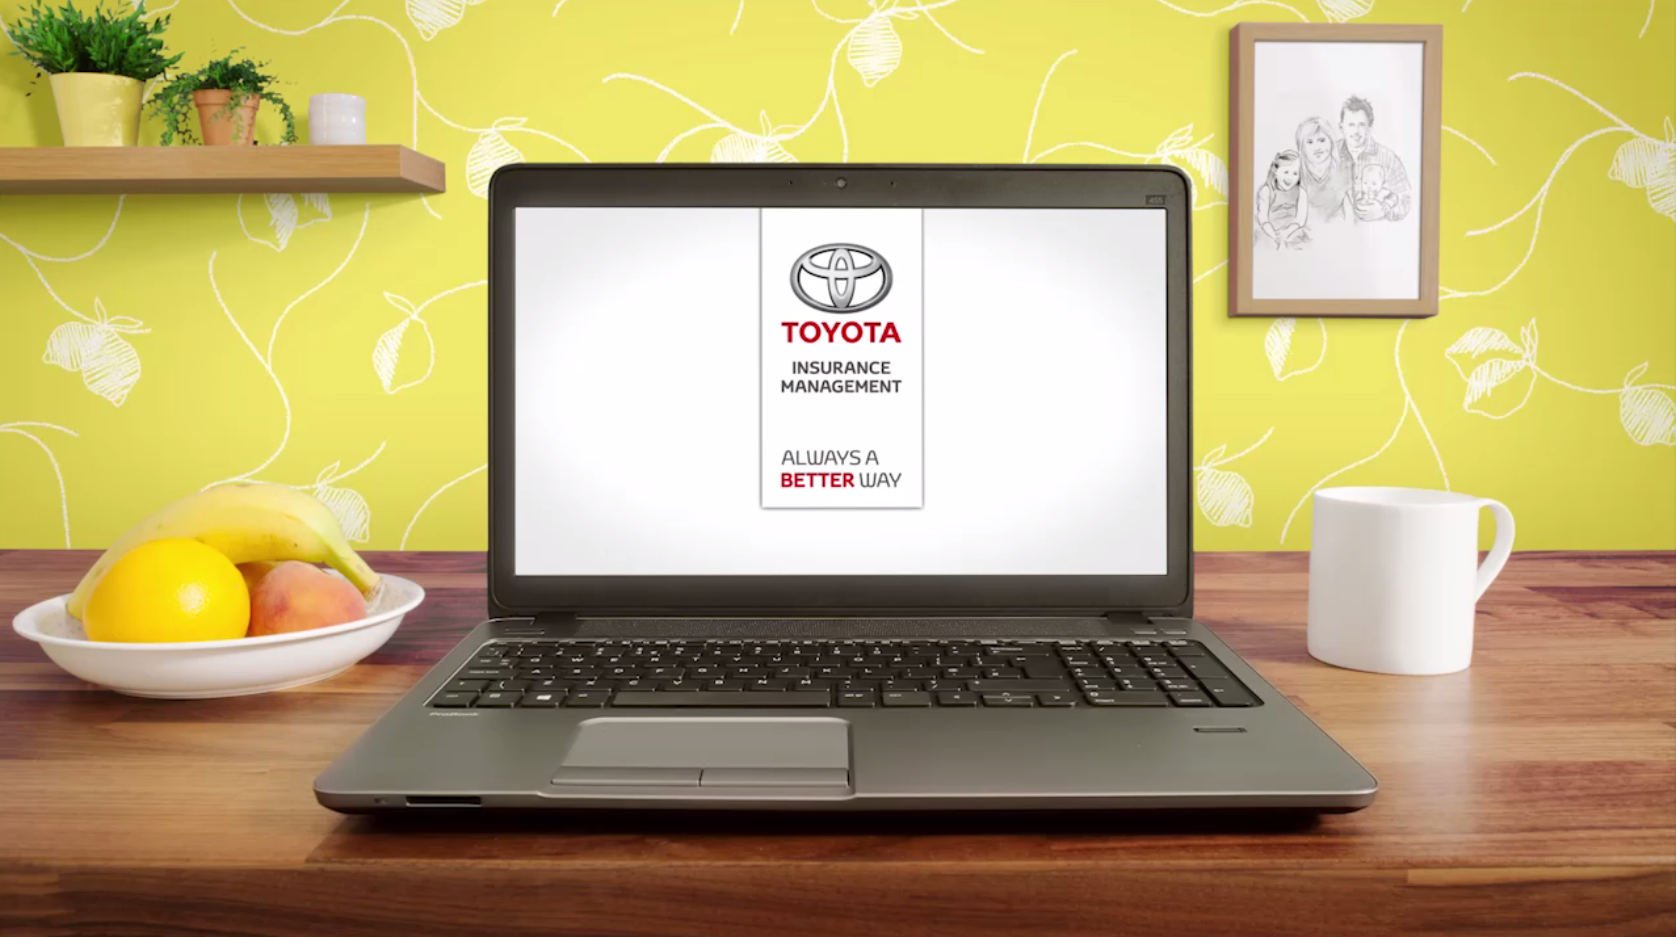 Introducing Toyota Insurance Management